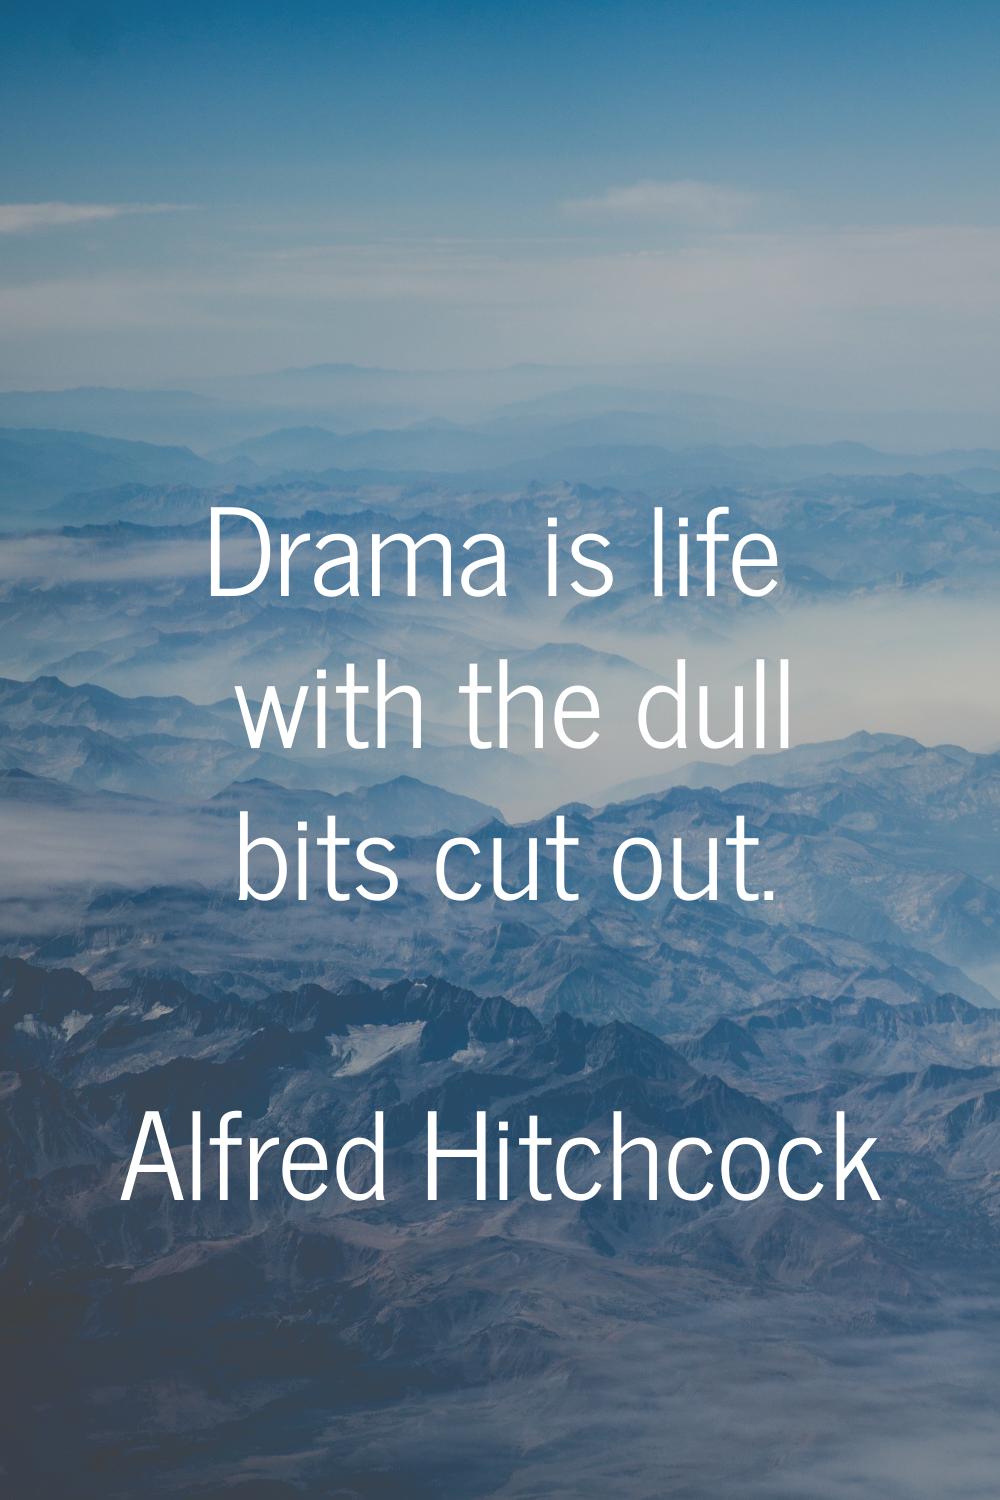 Drama is life with the dull bits cut out.